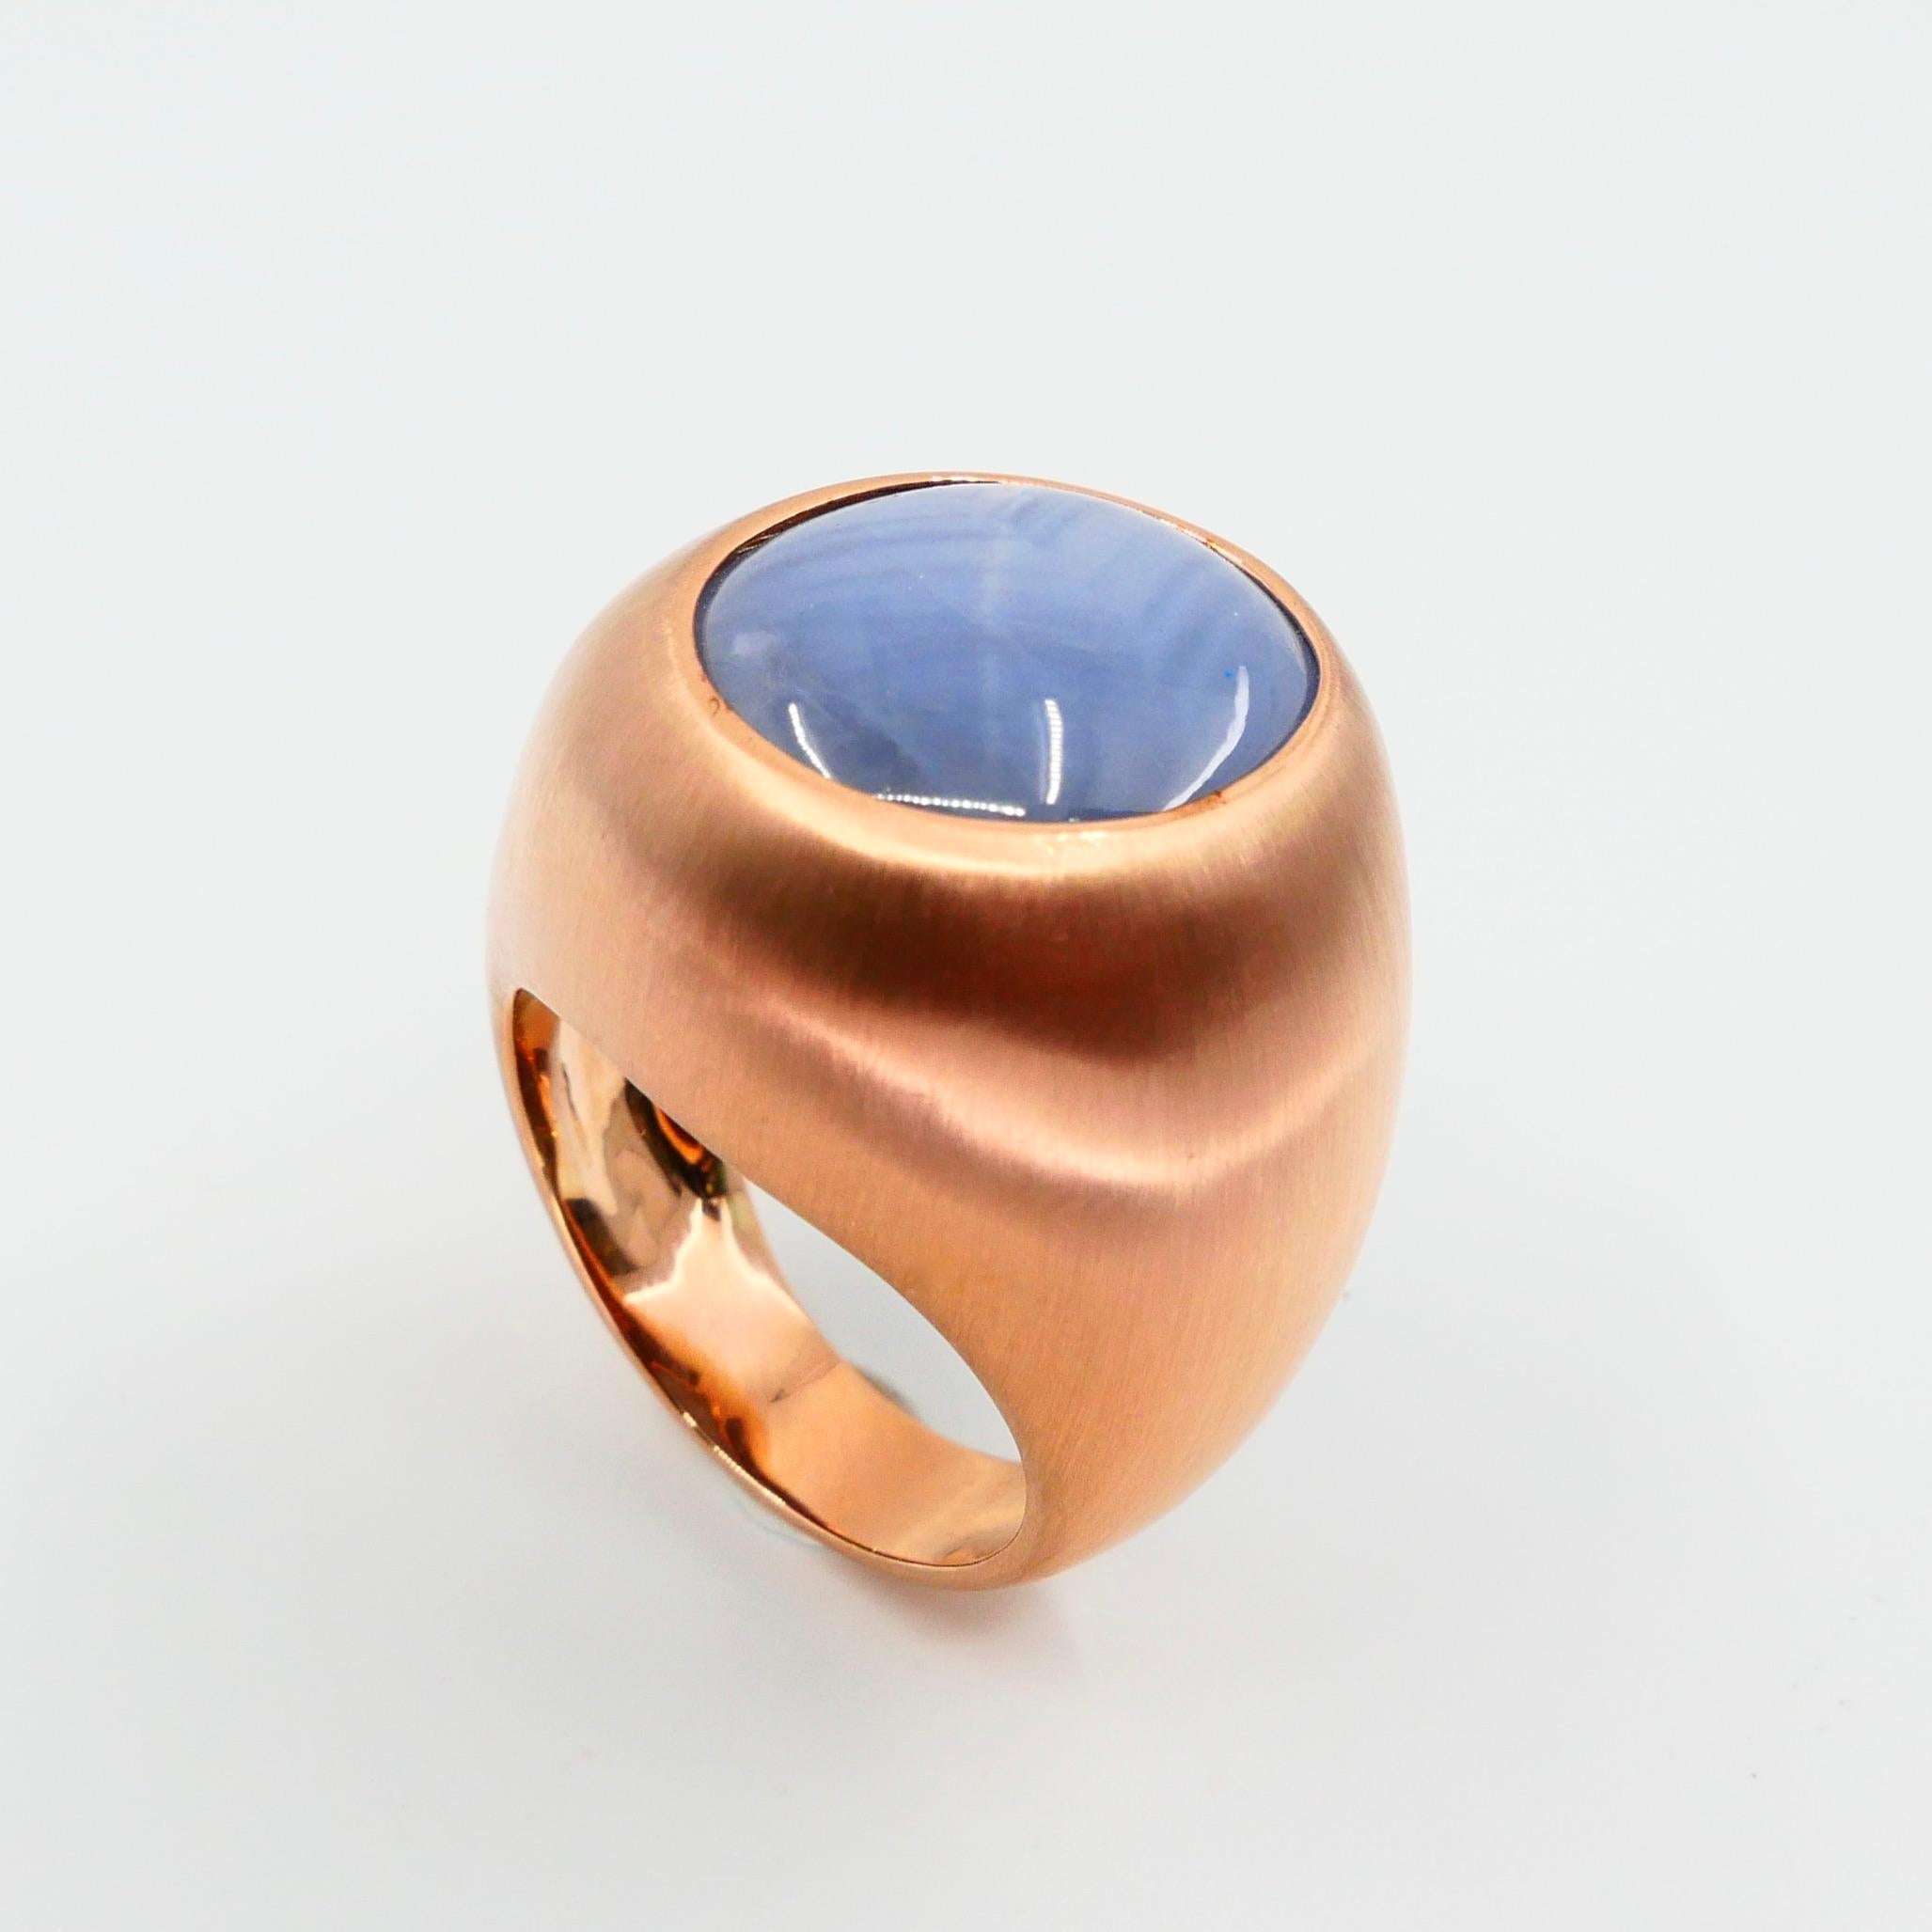 Contemporary Certified Blue Star Sapphire 39.28 Carat Rose Gold Ring, Unisex, Strong Star